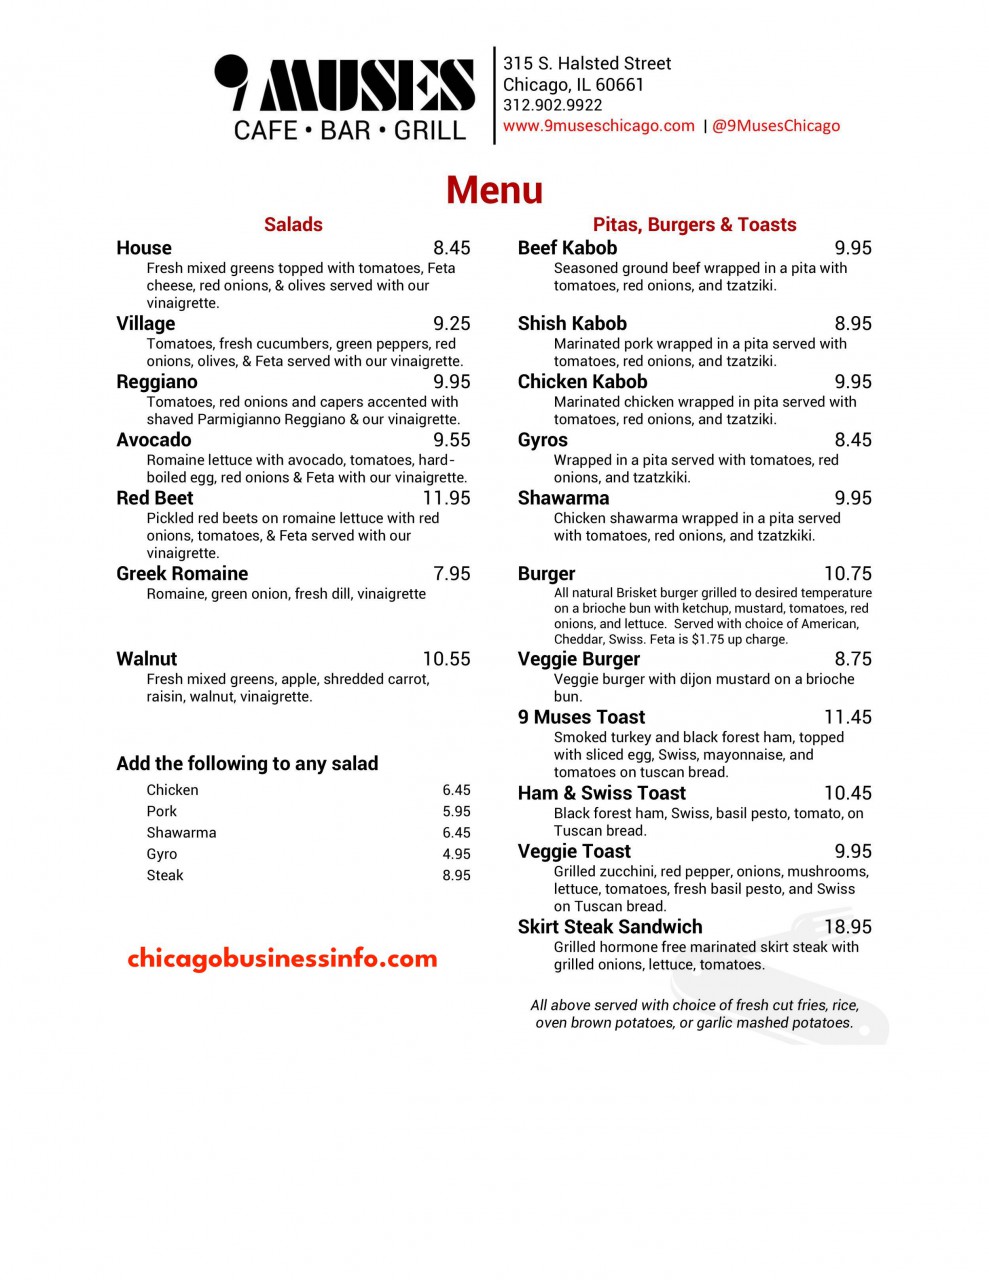 9 Muses Bar And Grill Chicago Menu 2